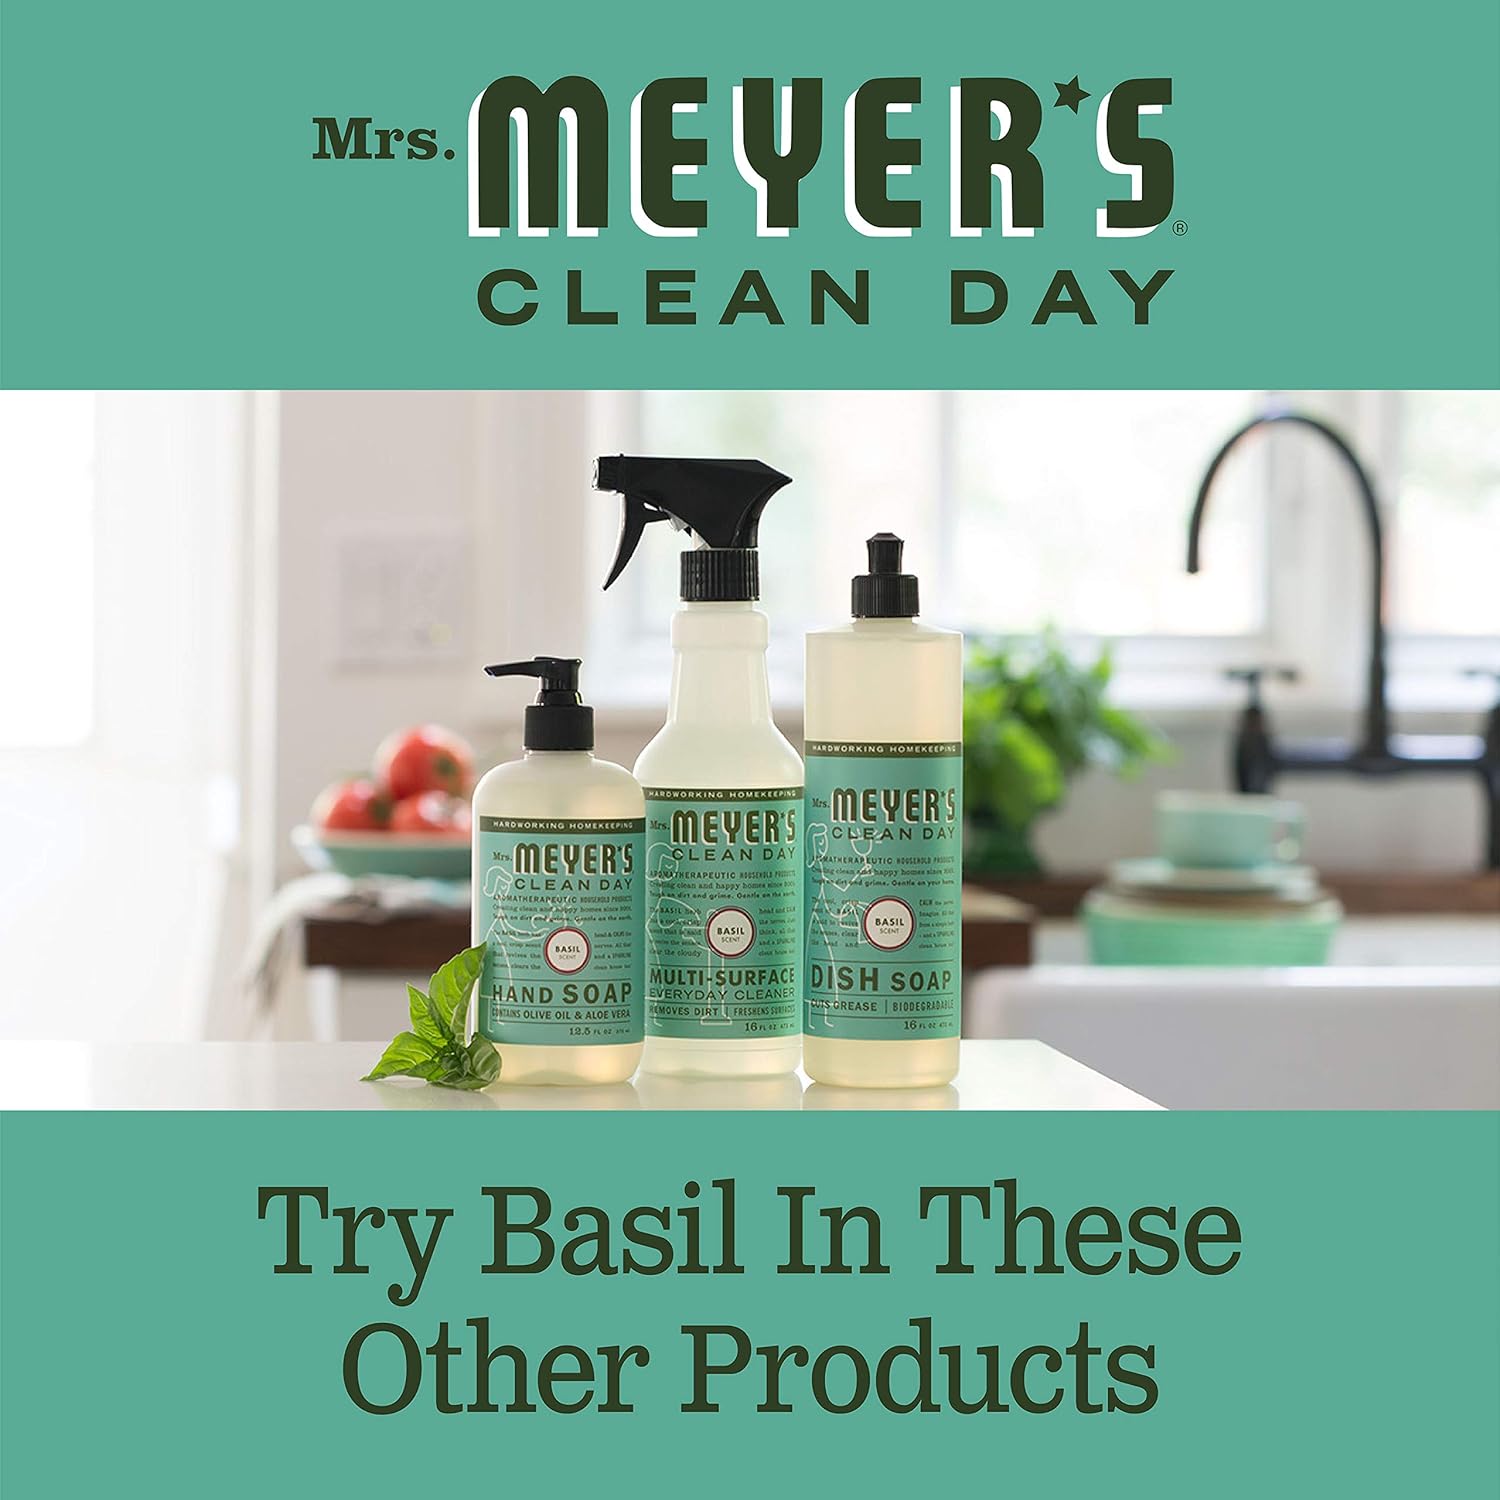 MRS. MEYER’S CLEAN DAY Liquid Dish Soap Refill Review